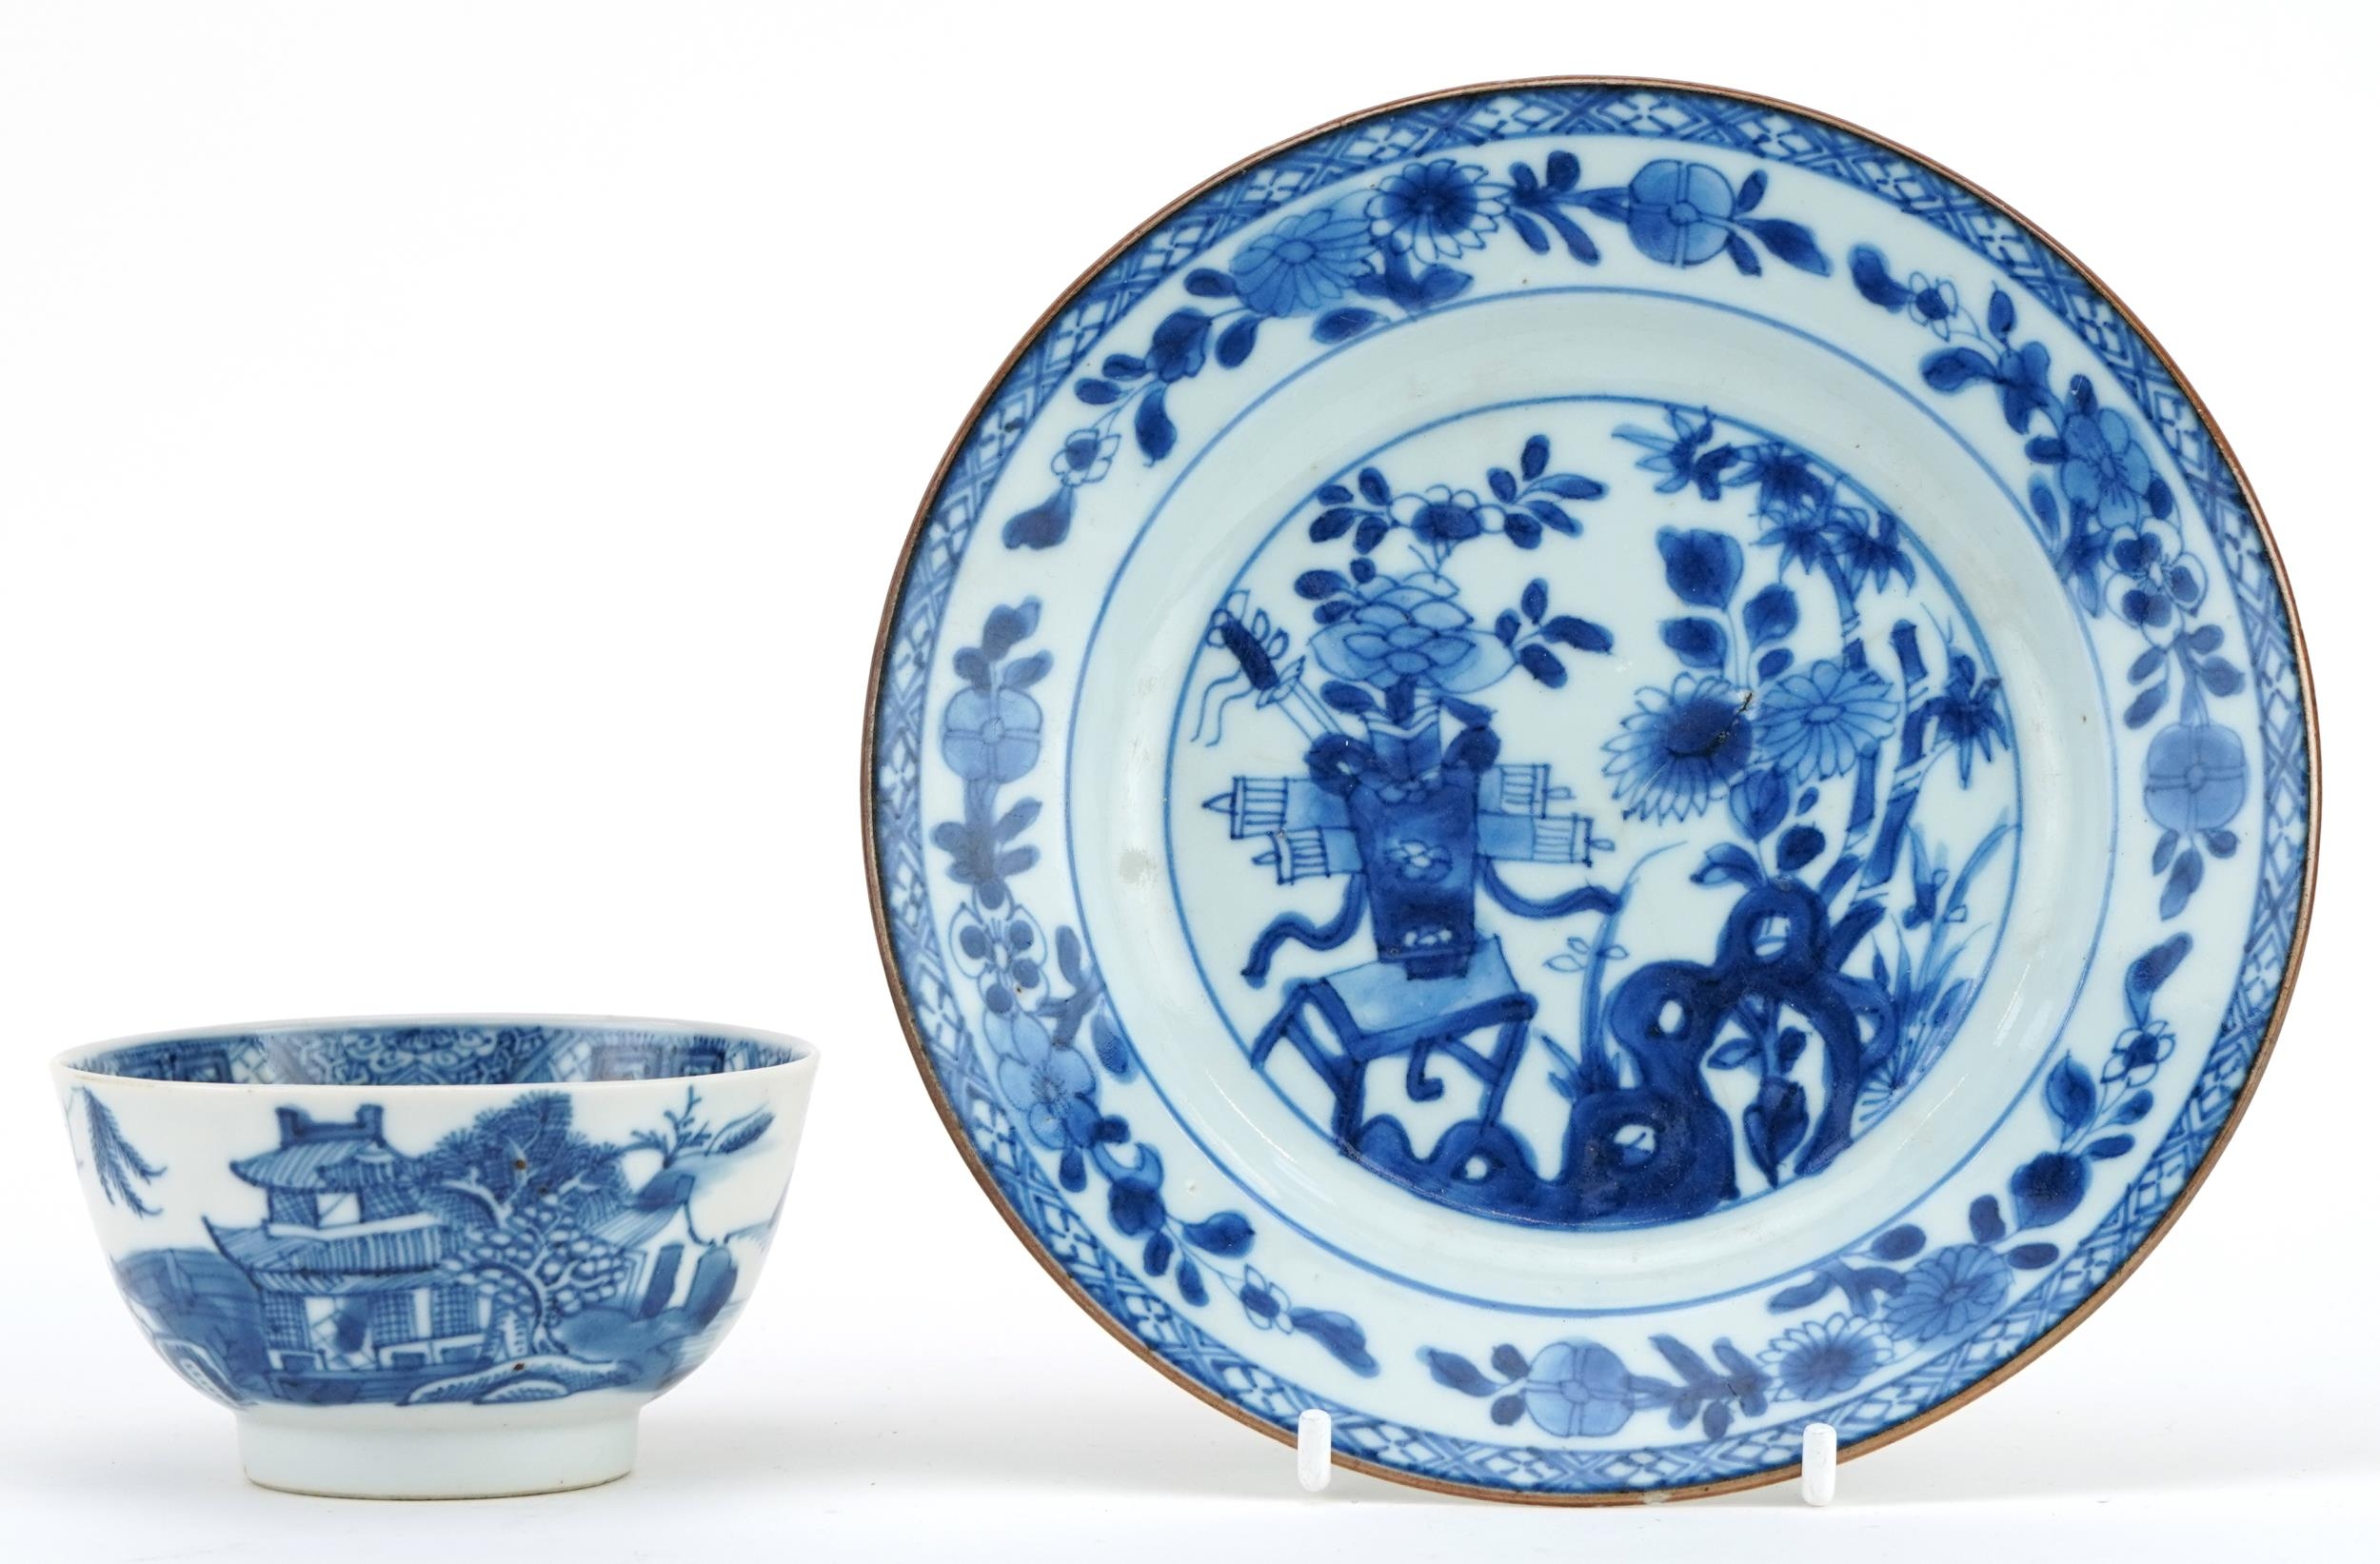 Chinese blue and white porcelain plate and tea bowl hand painted with a river landscape, the largest